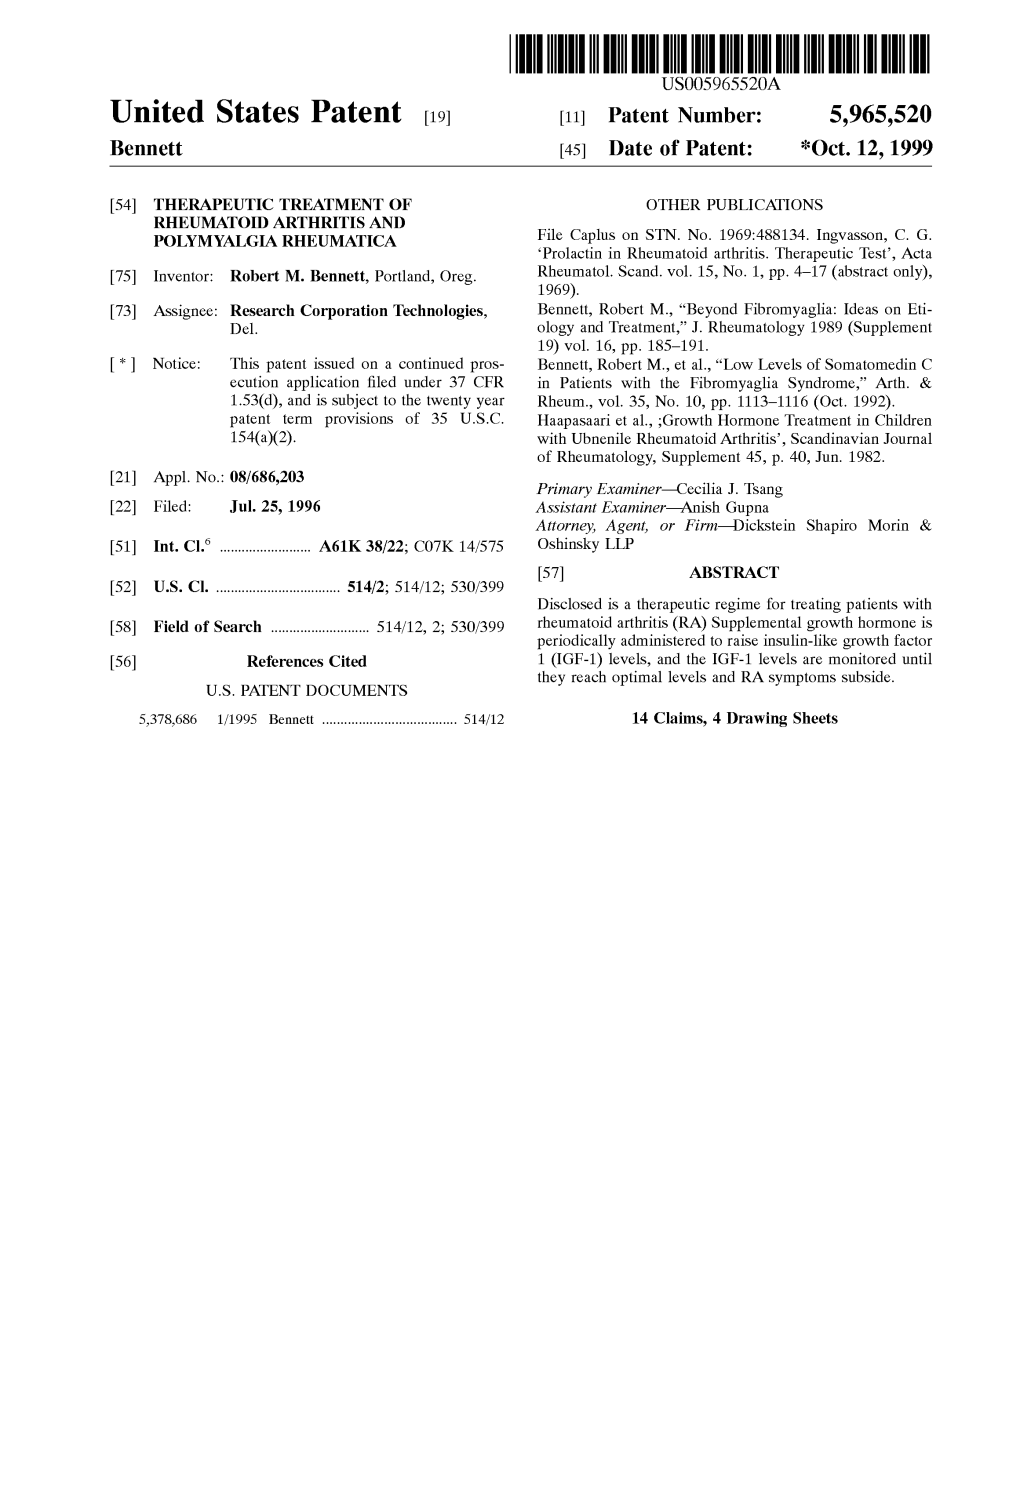 United States Patent (19) 11 Patent Number: 5,965,520 Bennett (45) Date of Patent: *Oct